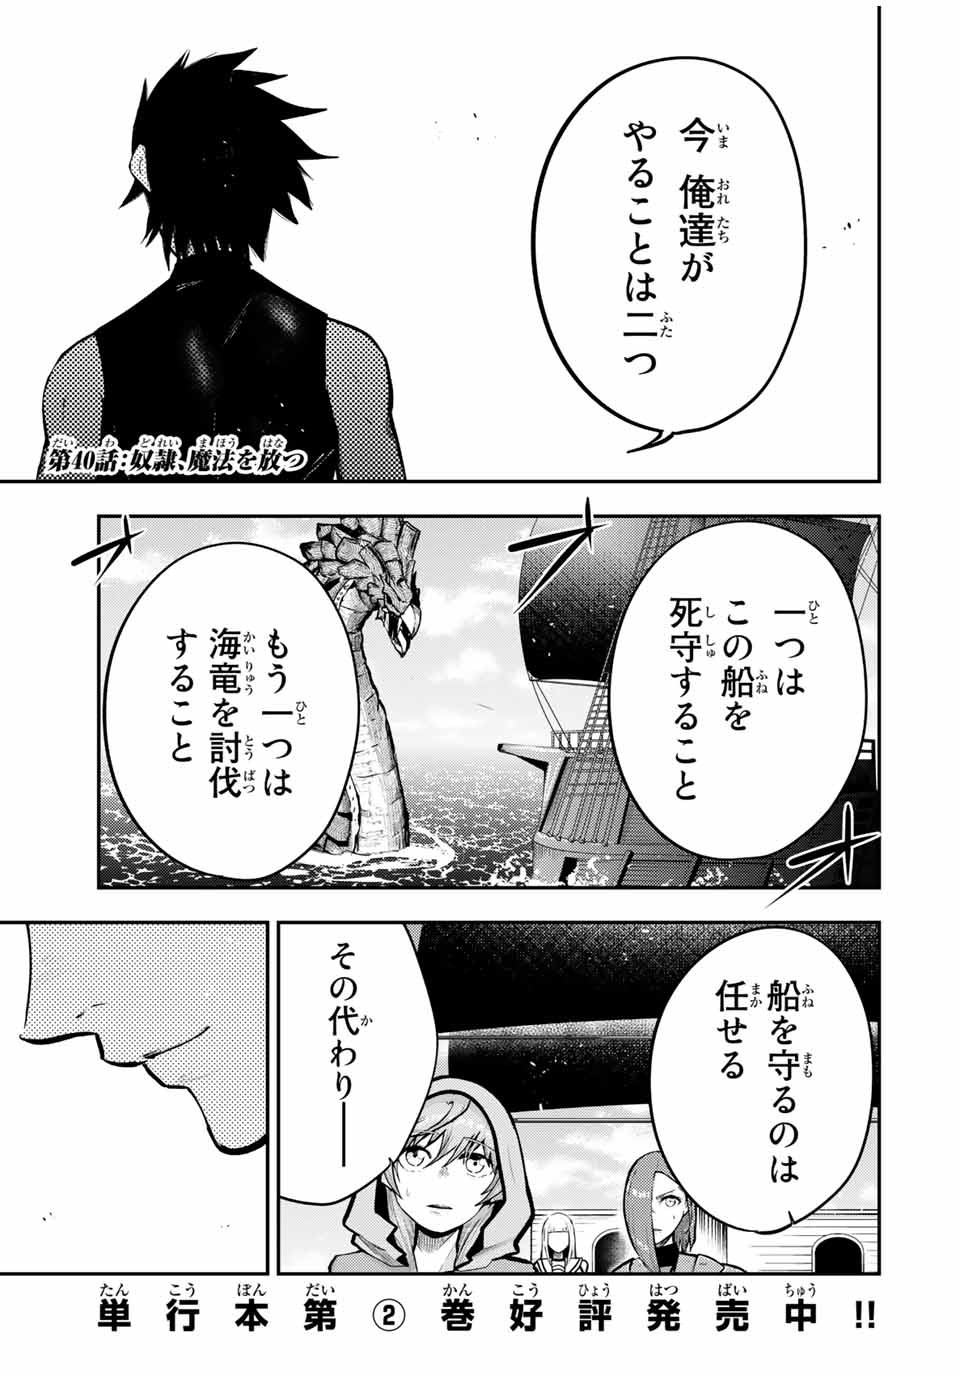 the strongest former prince-; 奴隷転生 ～その奴隷、最強の元王子につき～ 第40話 - Page 1